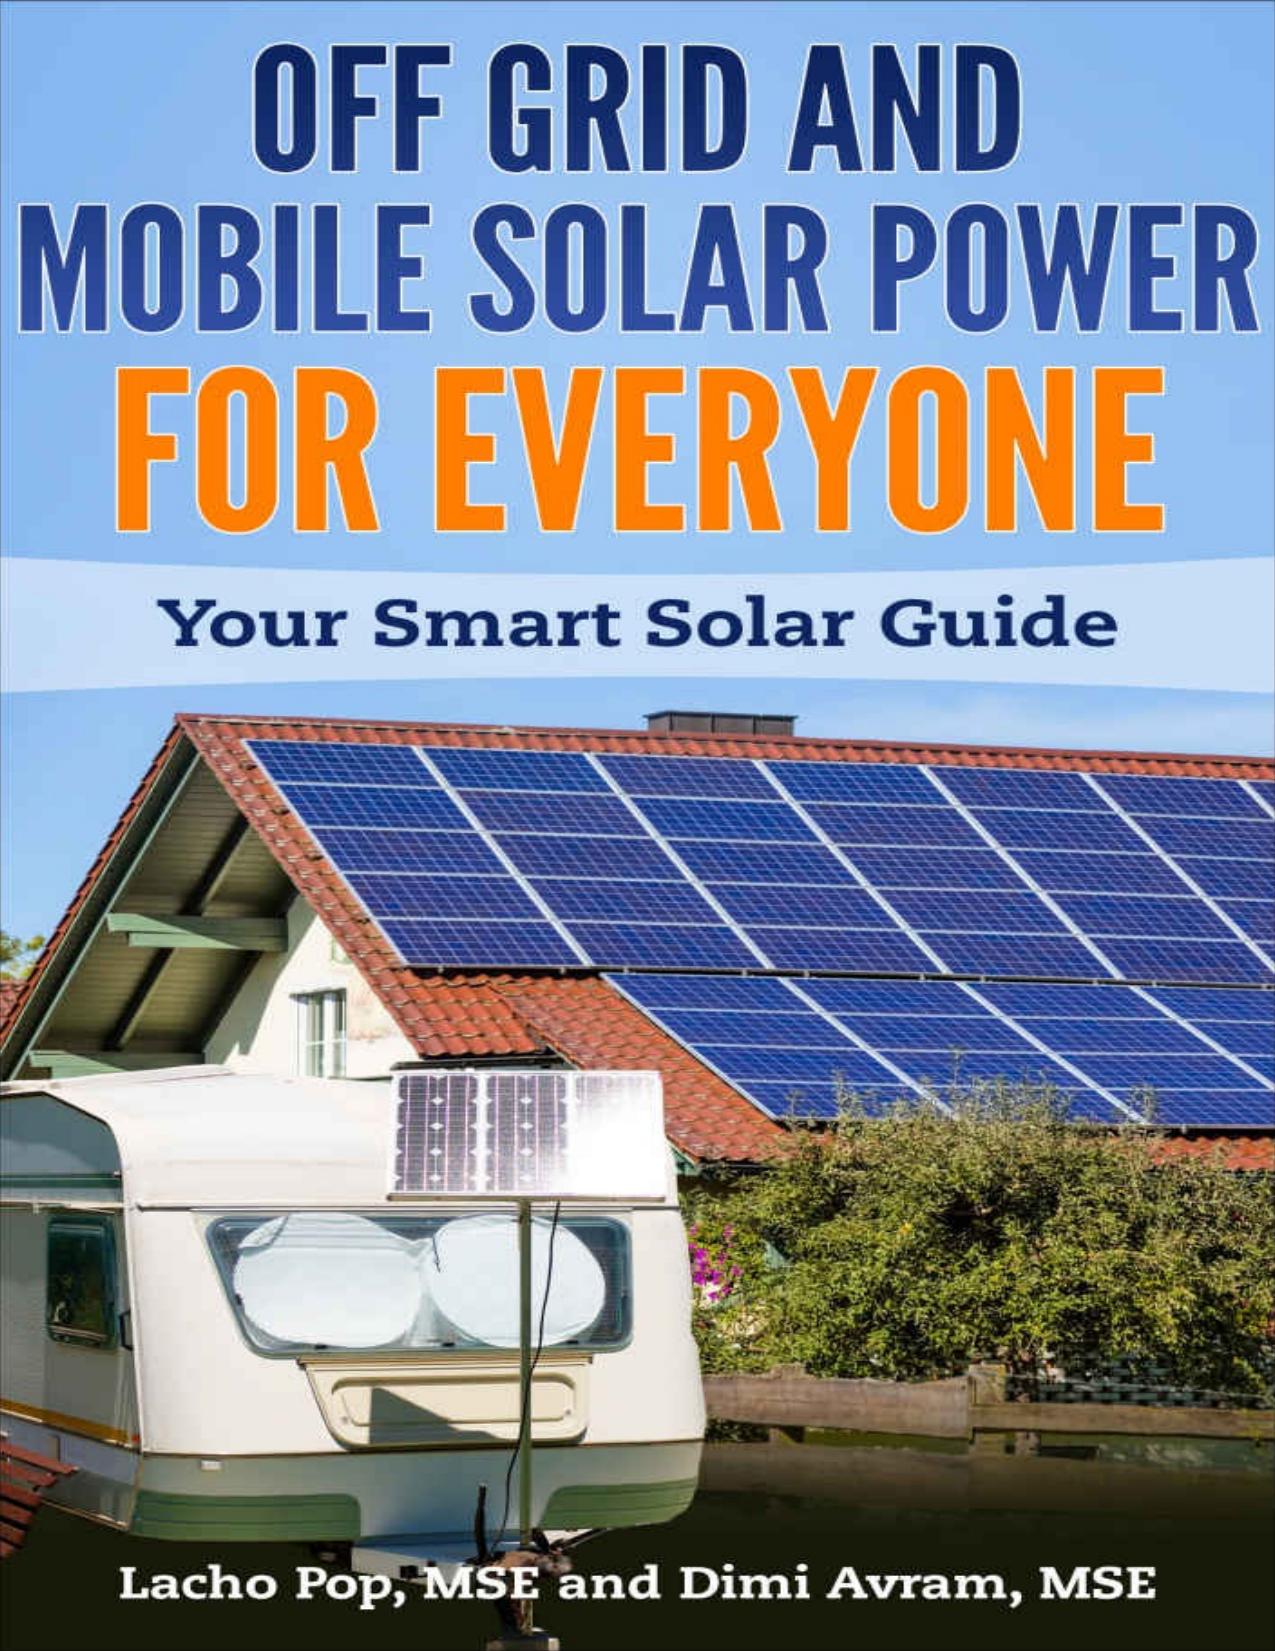 Off Grid And Mobile Solar Power For Everyone: Your Smart Solar Guide by Lacho Pop MSE & Dimi Avram MSE